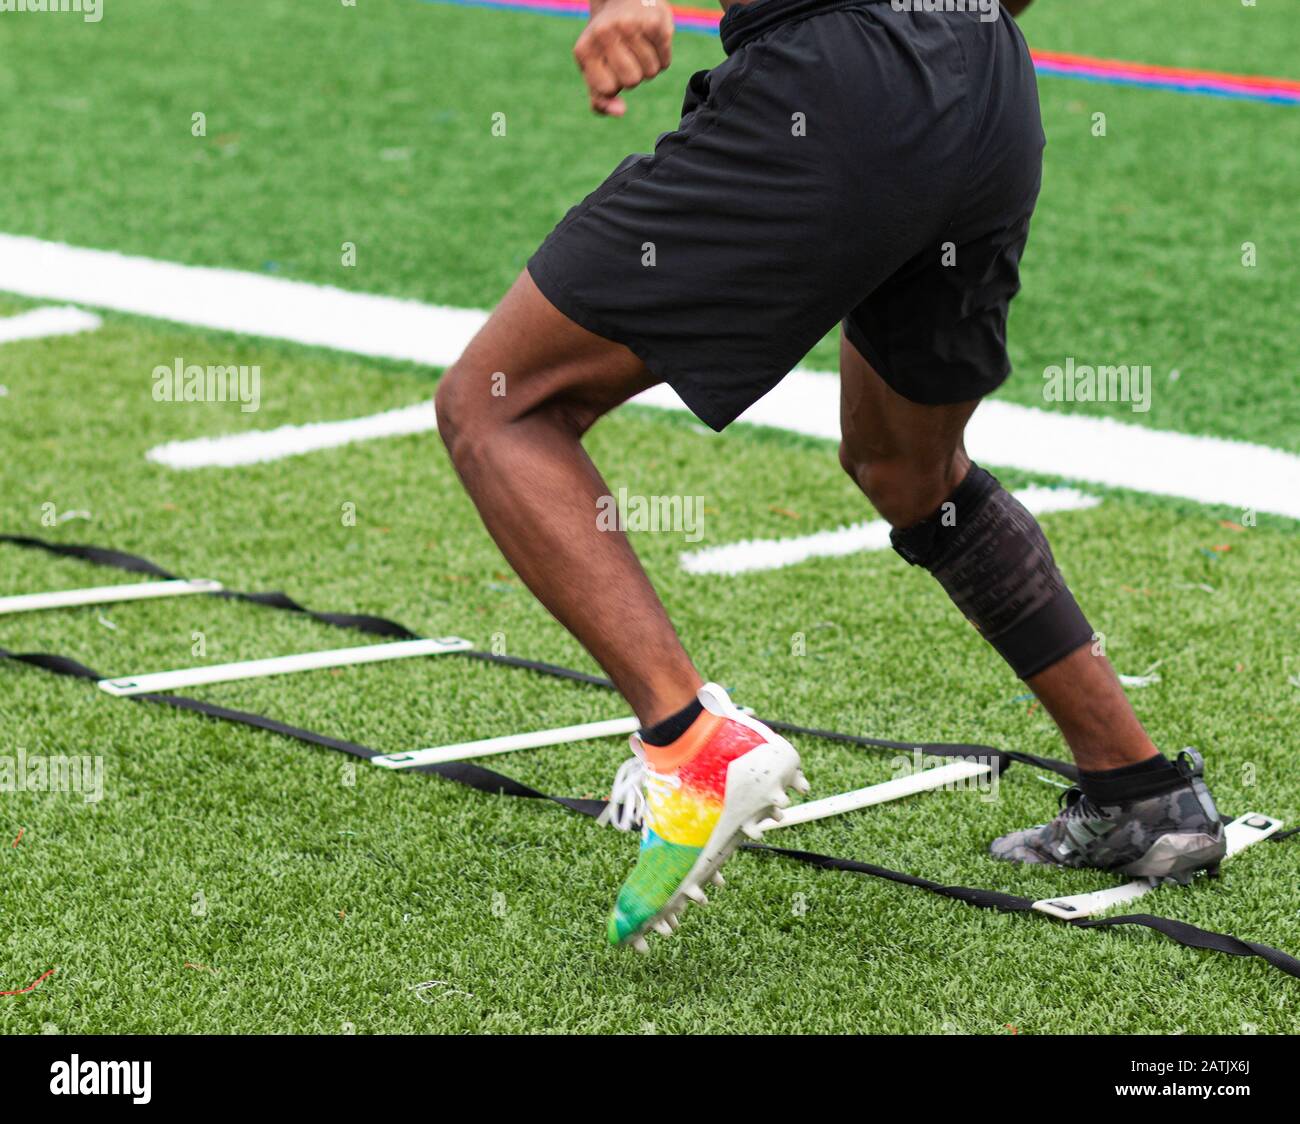 A high school boy is running ladder drills with colorful cleats on a turf field during summer camp practices. Stock Photo